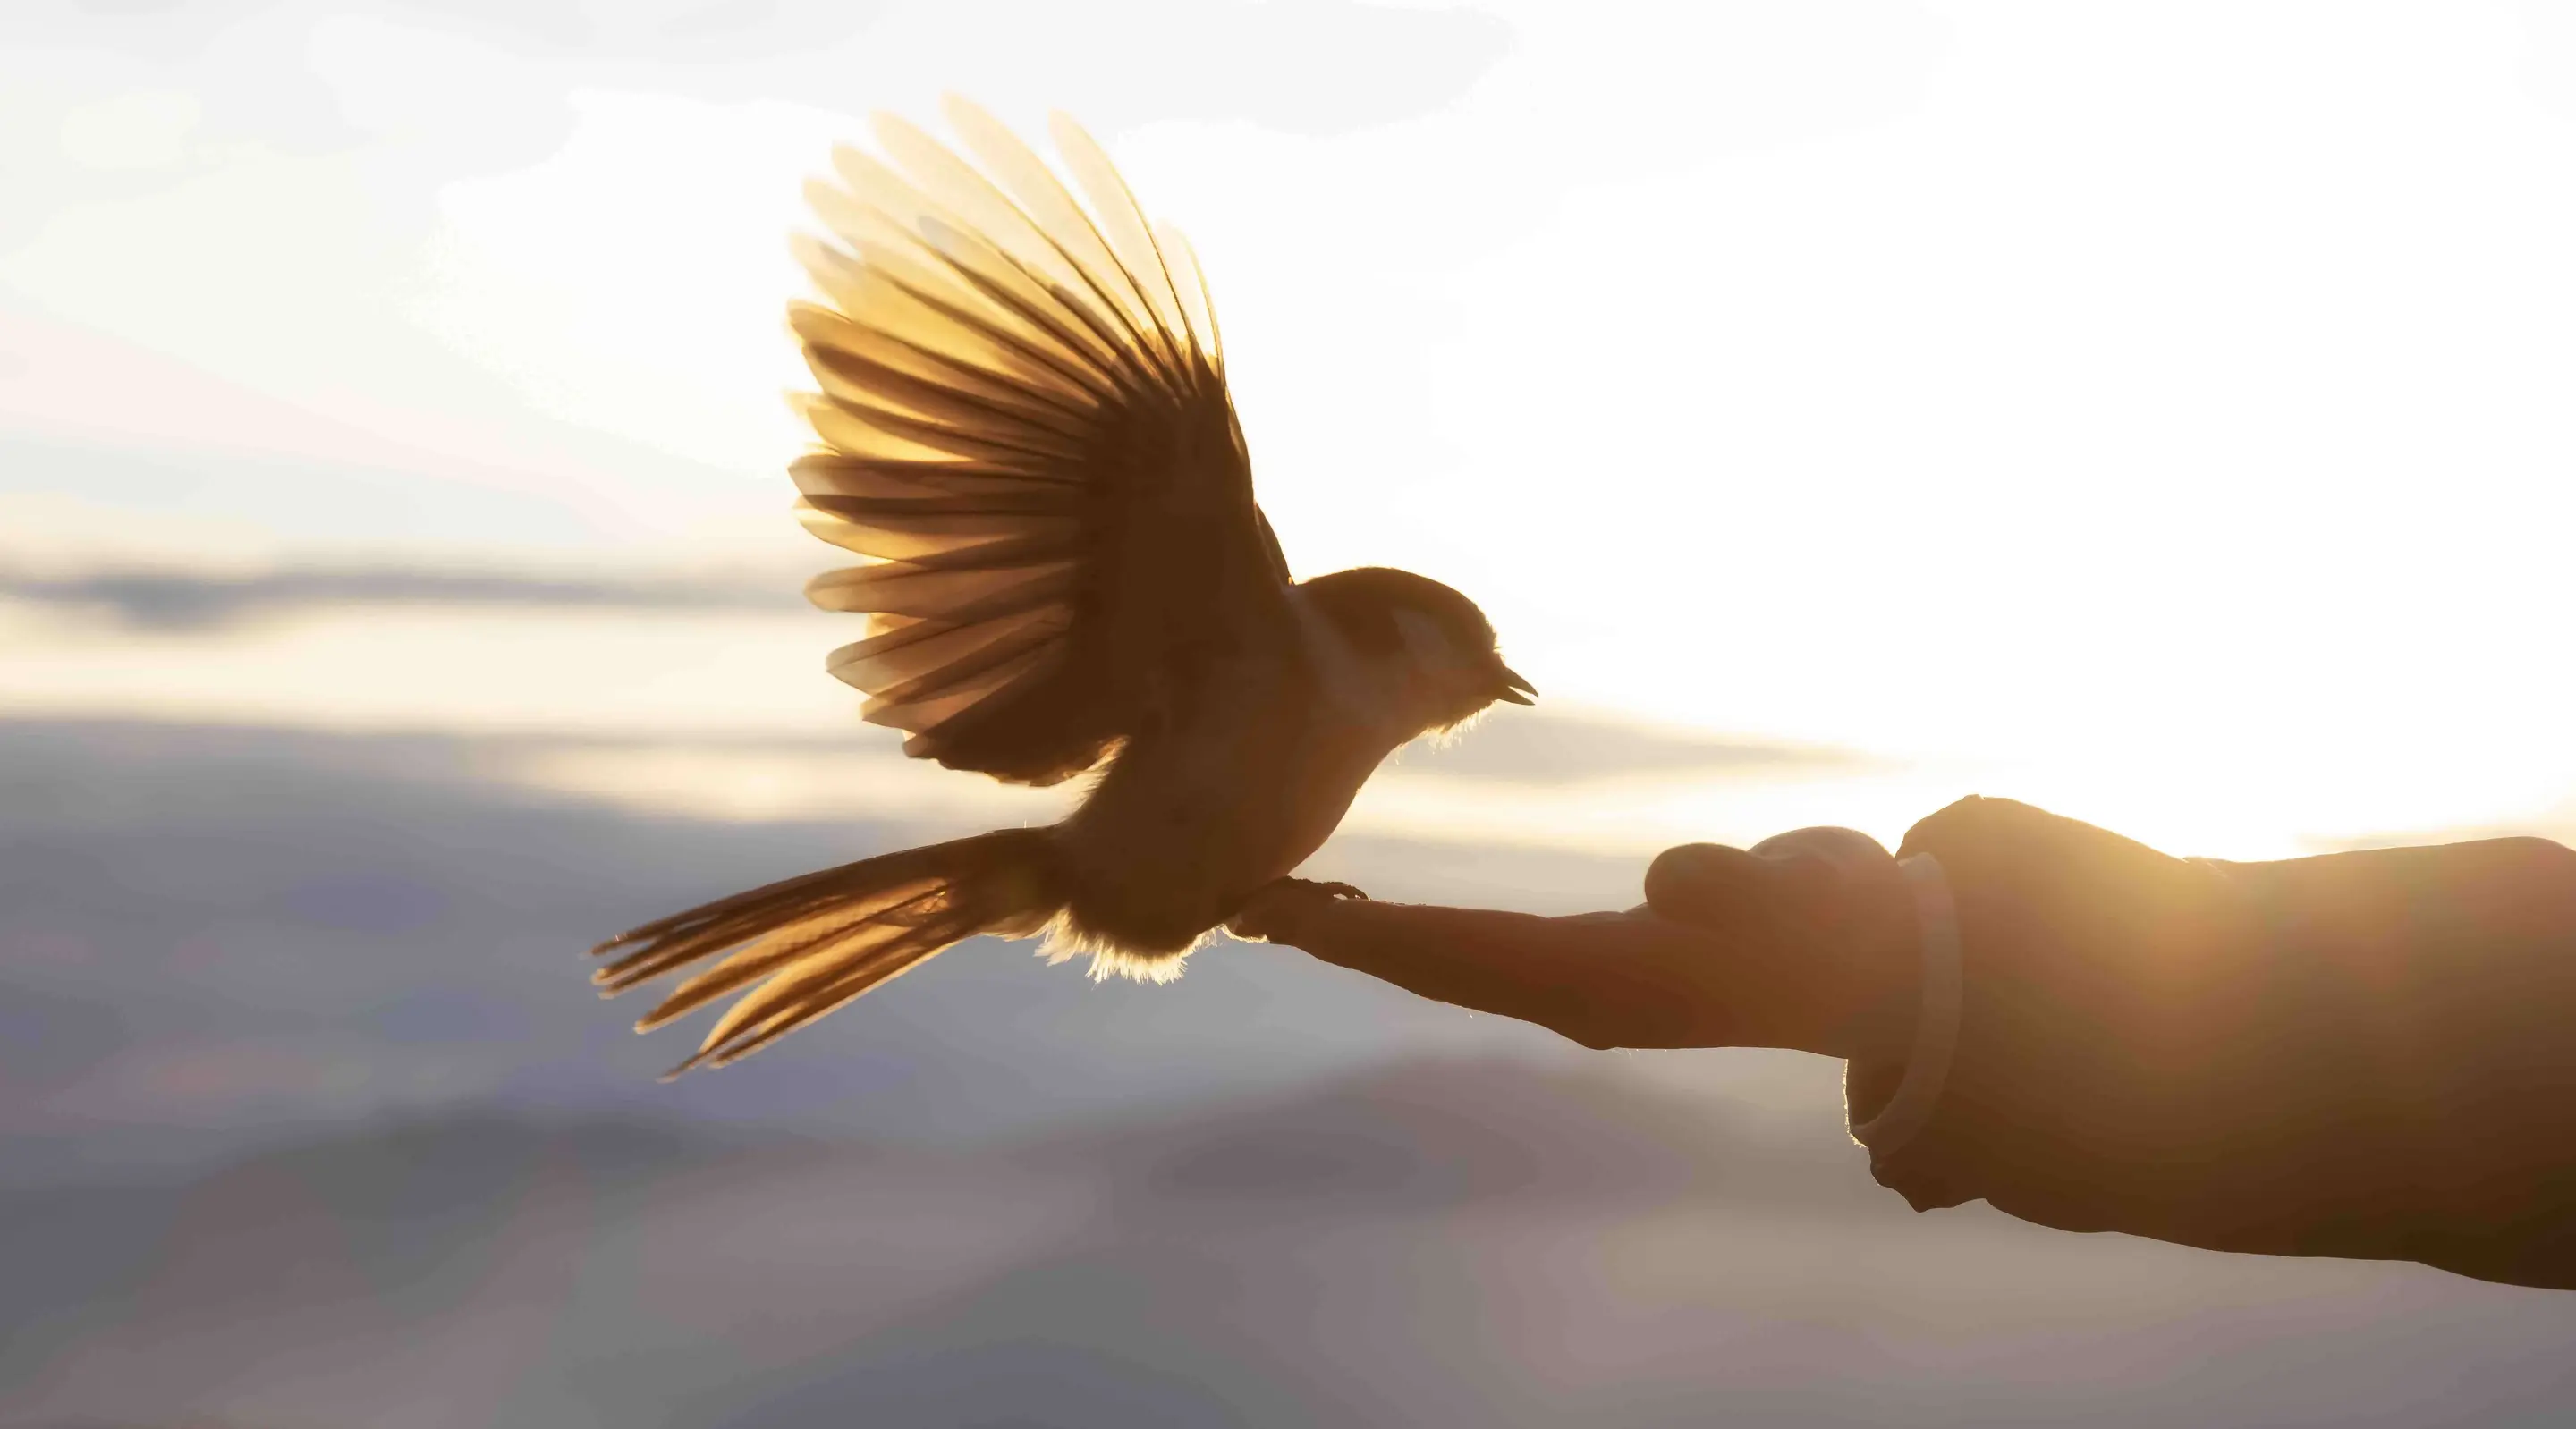 A bird, silhouetted against a sunlit background, landing on a person's hand with its wings still raised. 